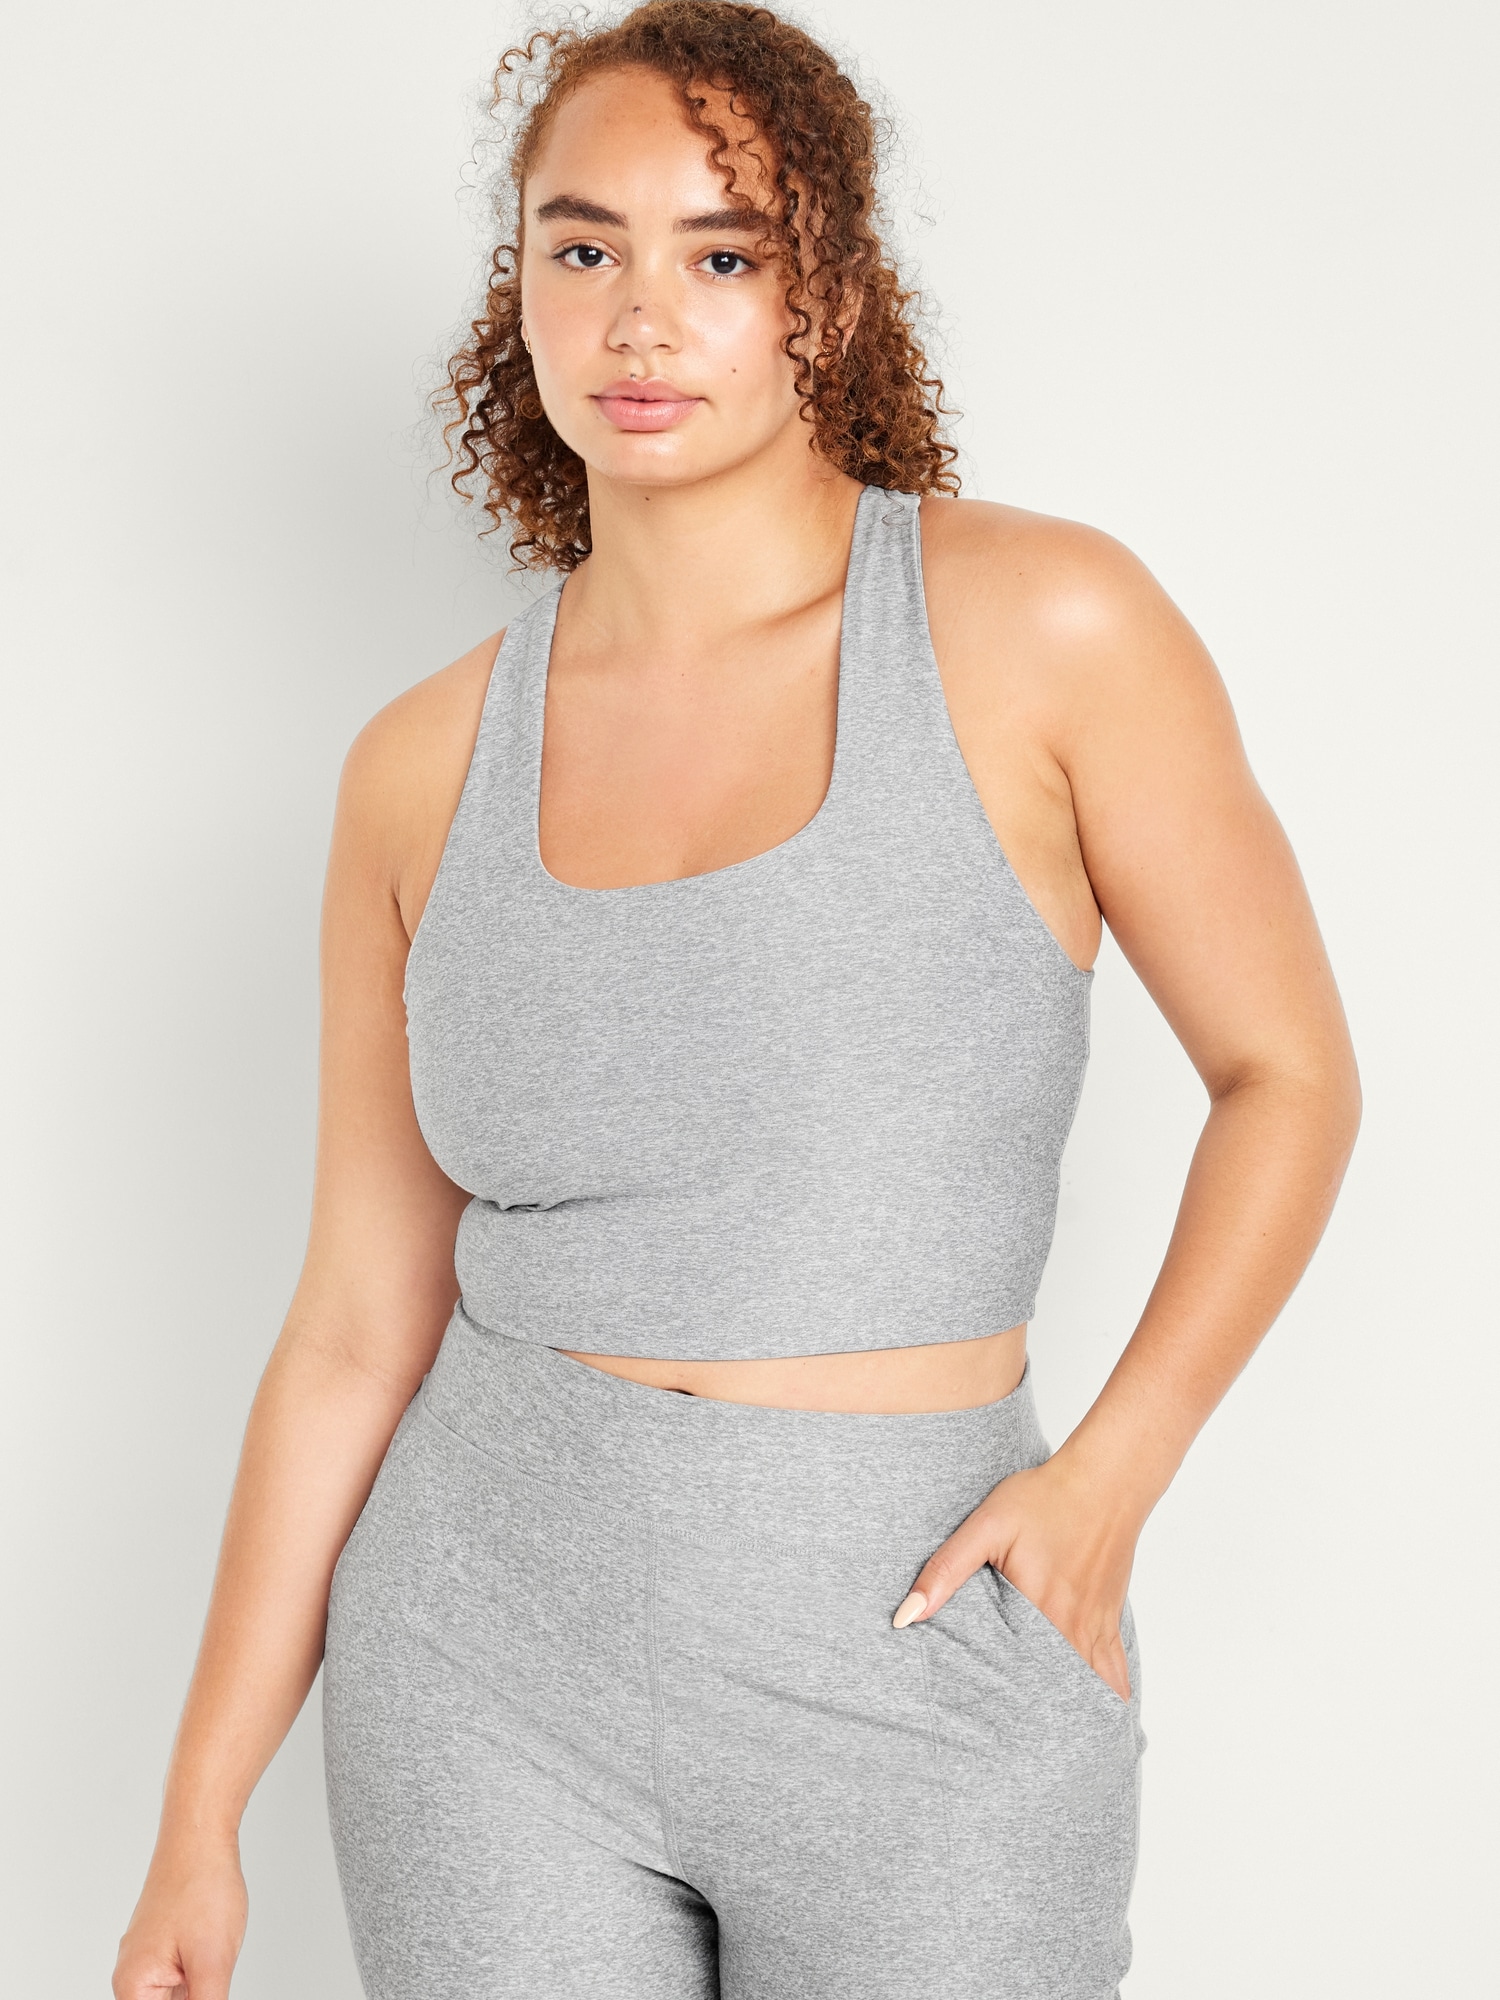 2 Pcs Sports Bra for Women with Removable Cups Spaghetti Strap Yoga Vest  High Support Compression Tanktop (Color : Gray, Size : Medium)